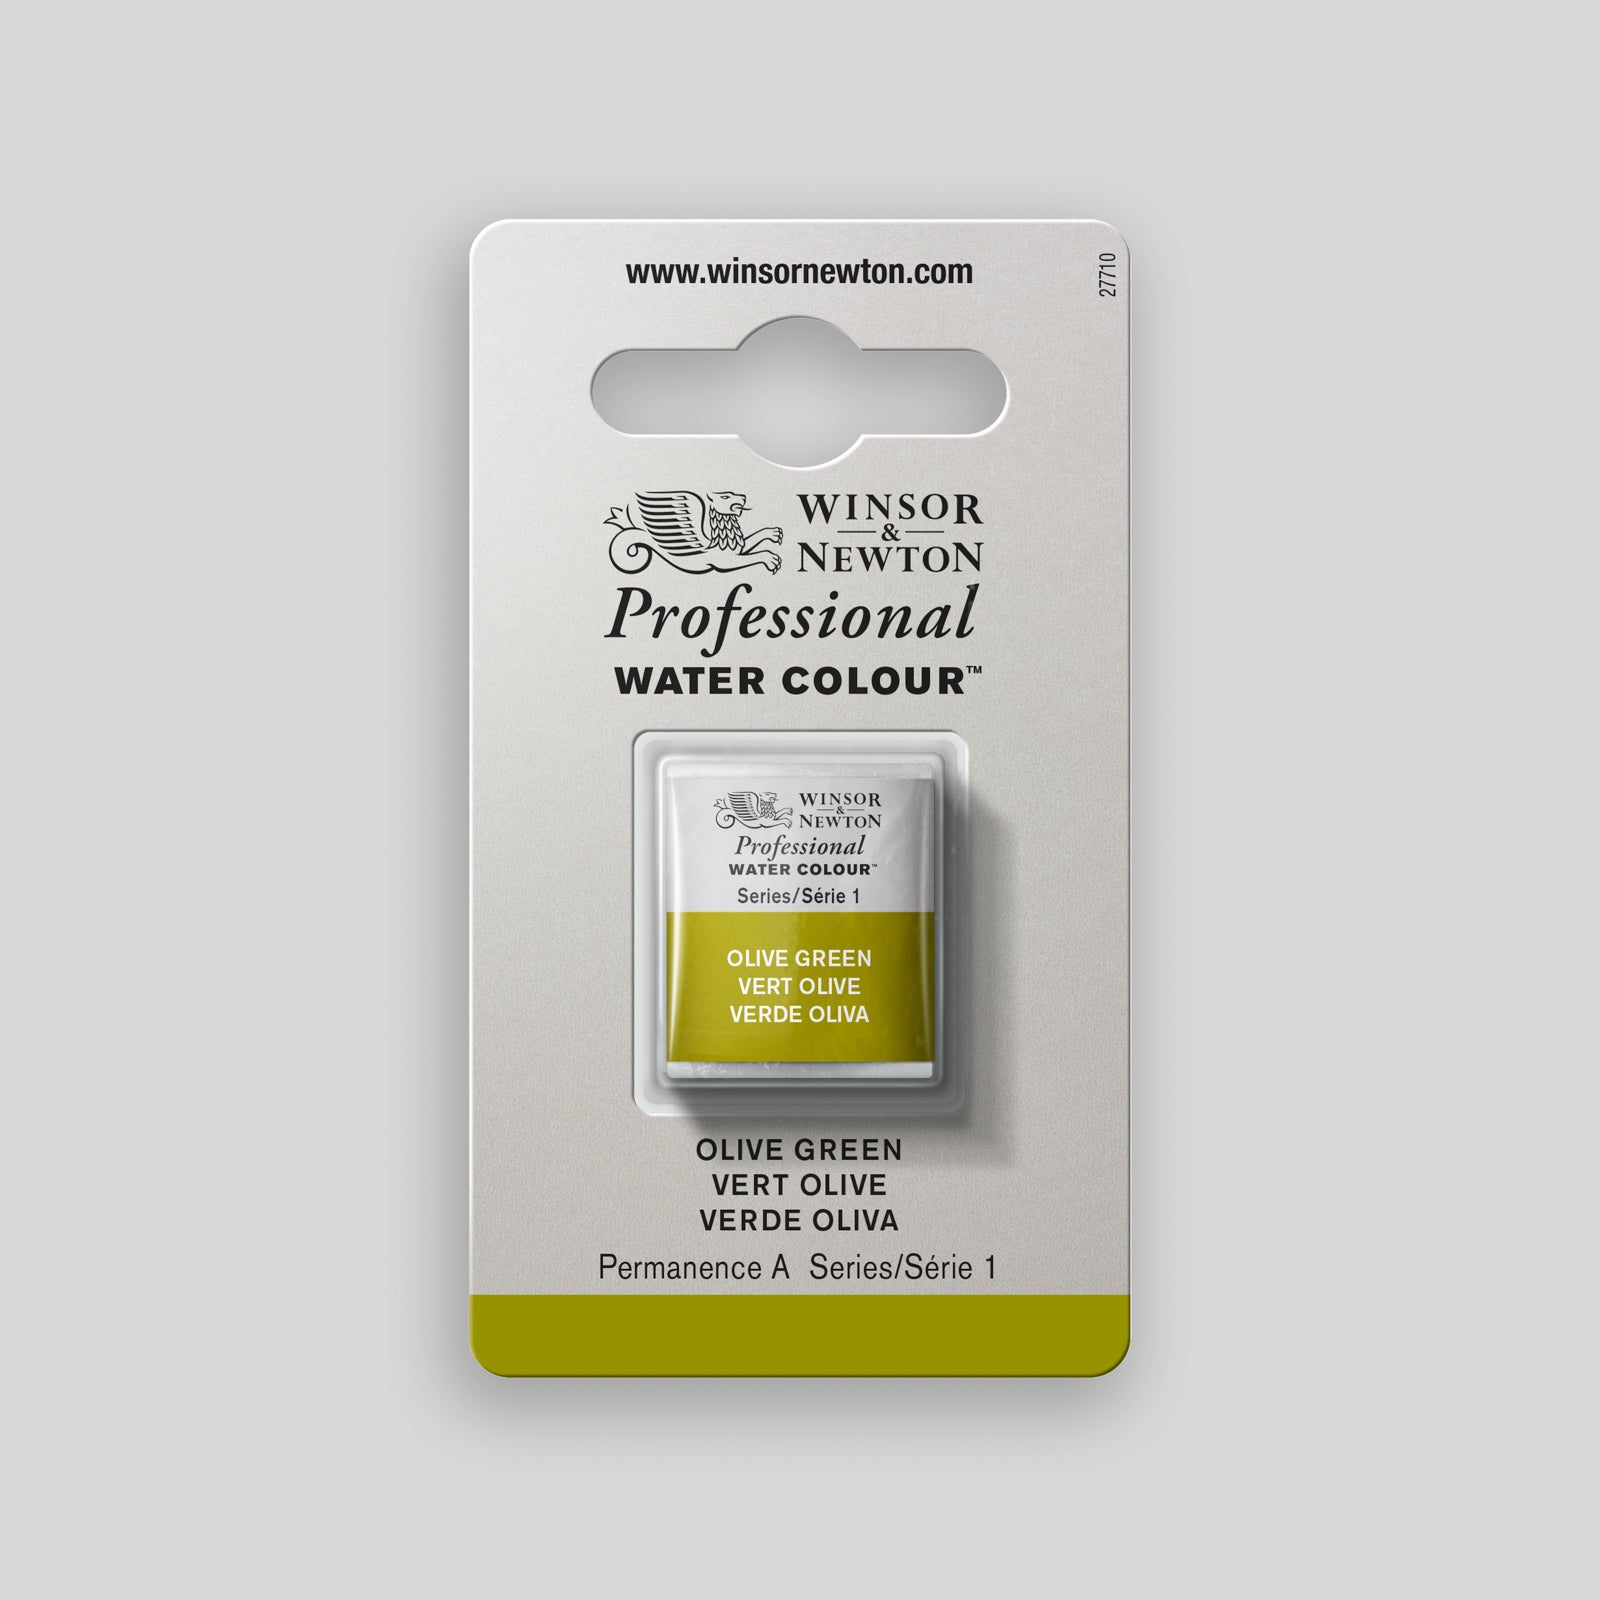 Winsor & Newton Professional Water Colour half pan Olive Green 1